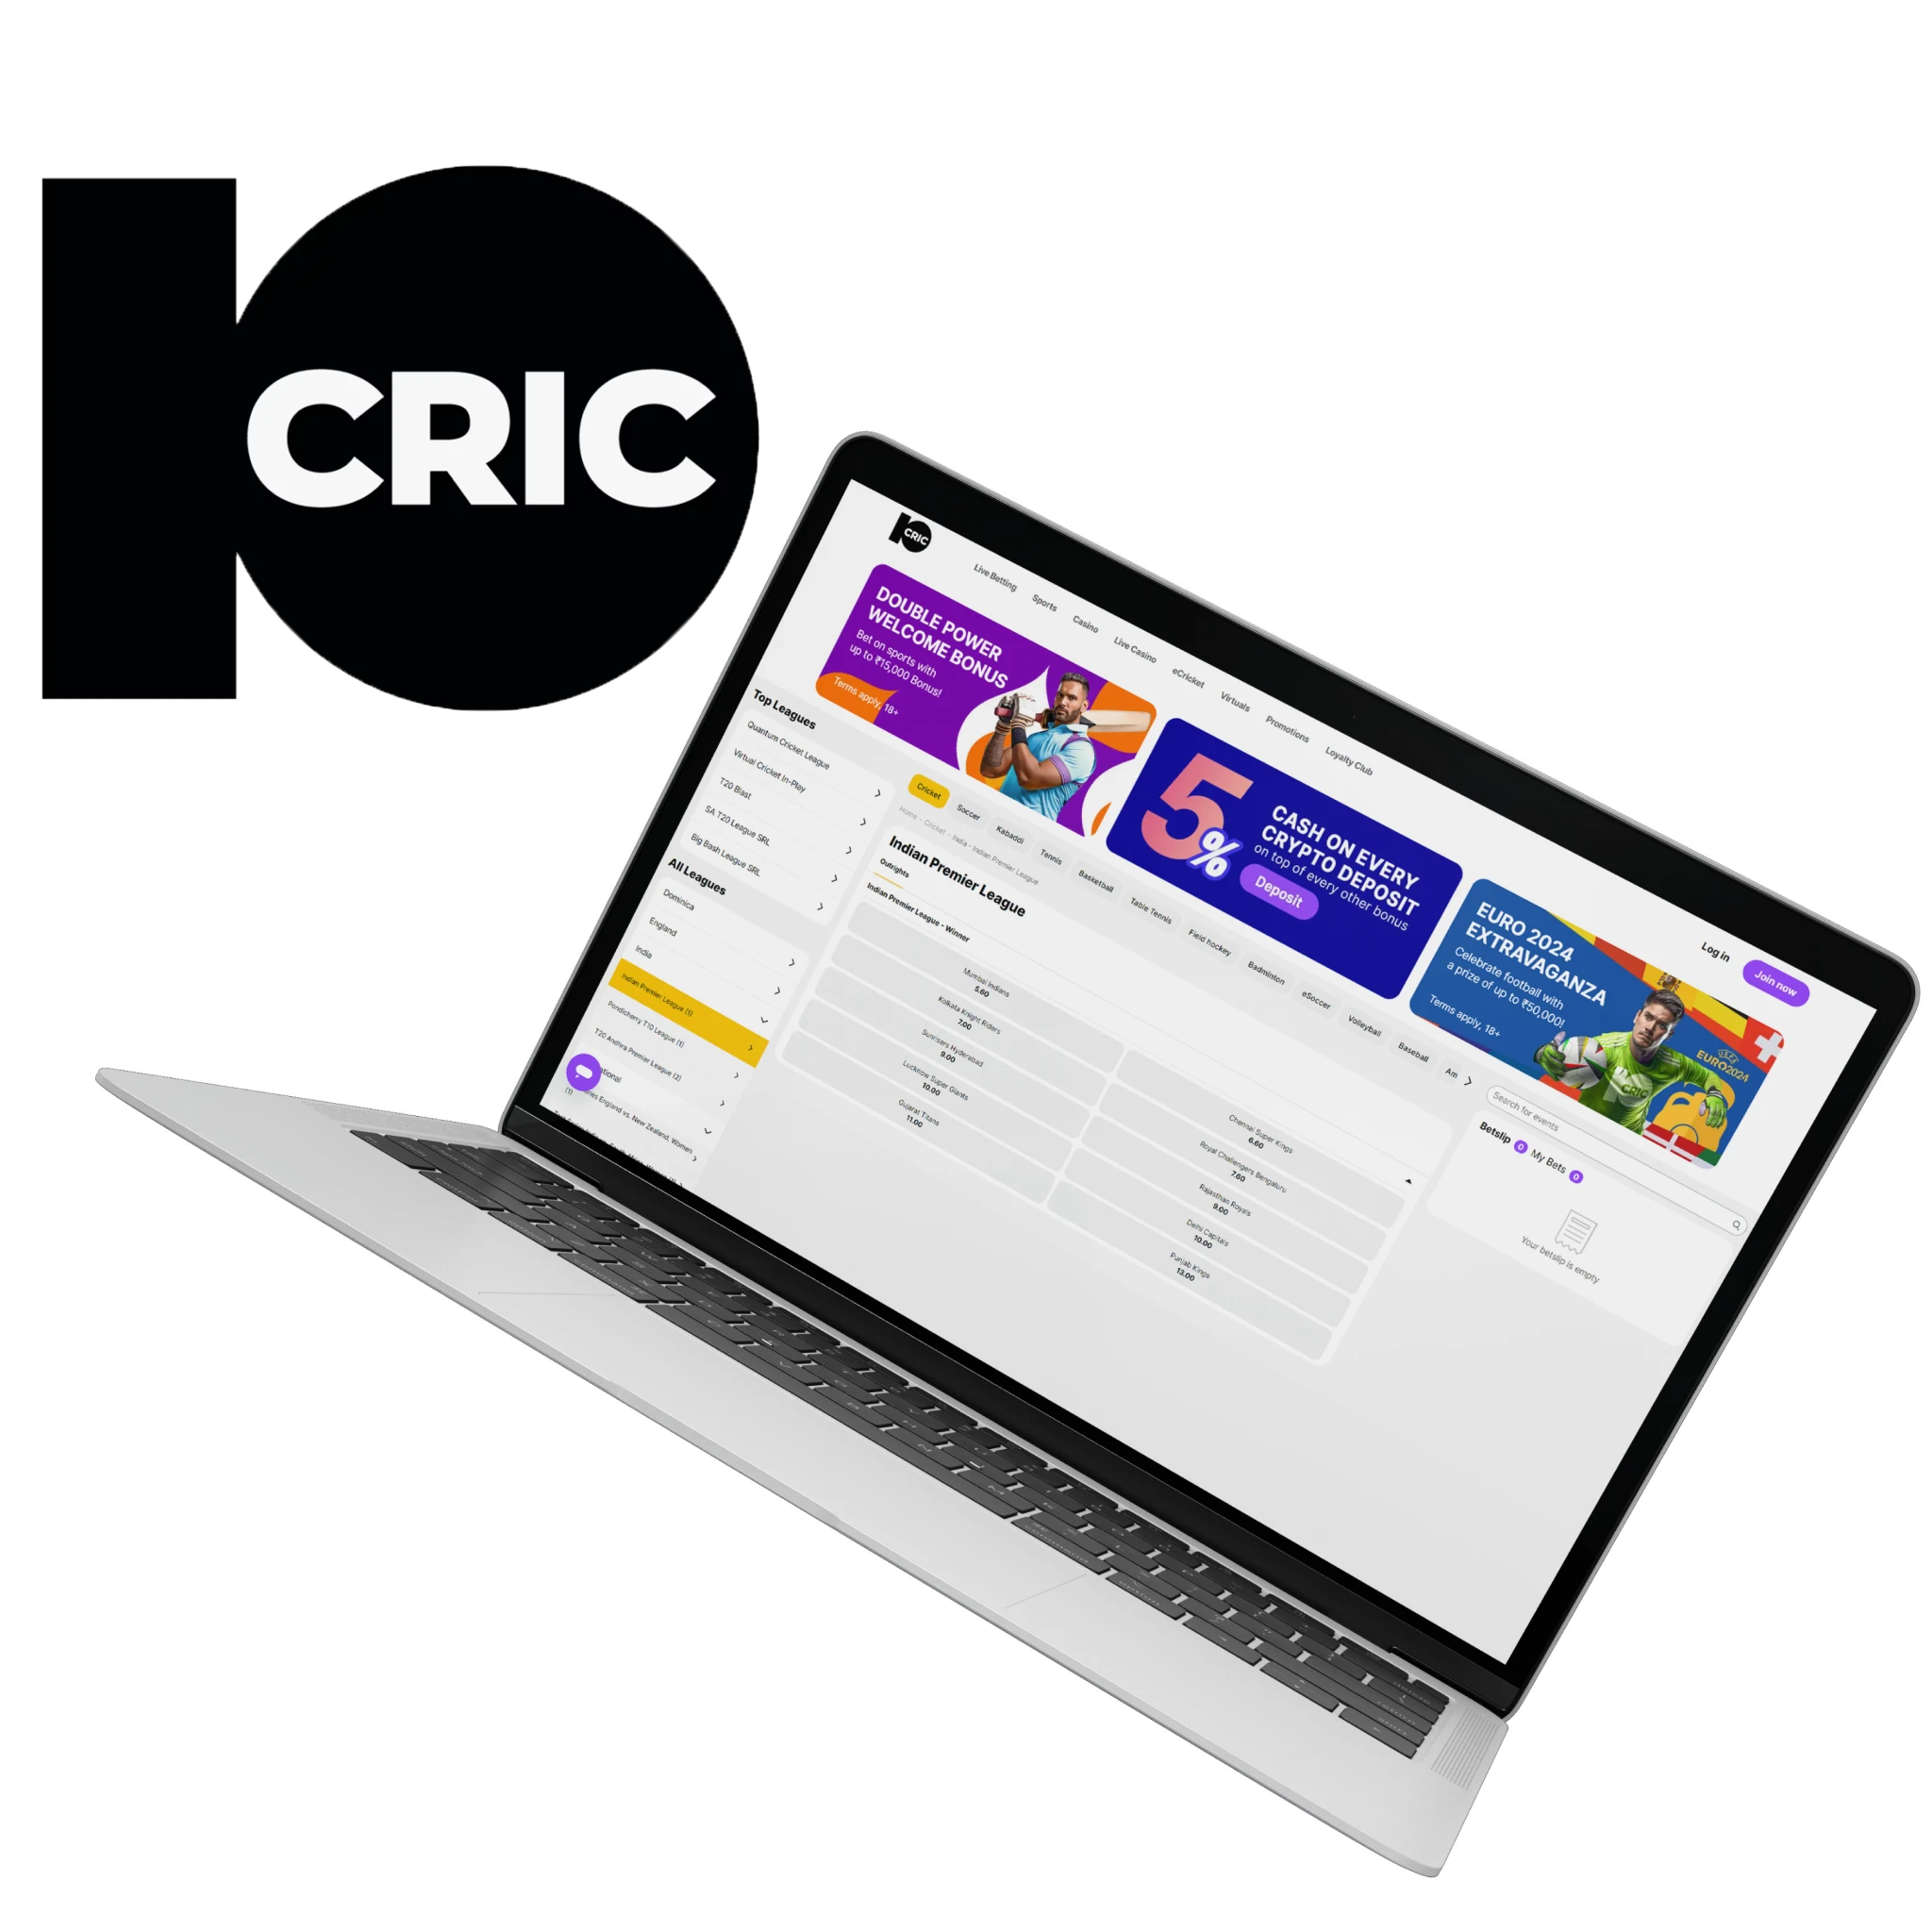 10cric is a gambling platform with daily live cricket broadcasts and extremely high odds.